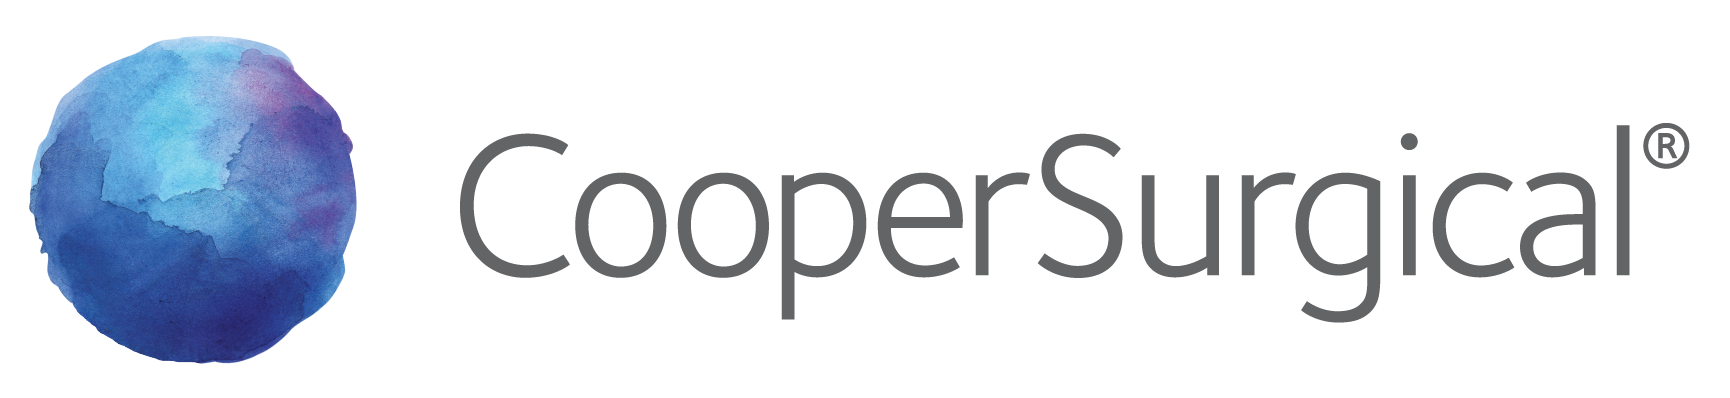 Cooper surgical